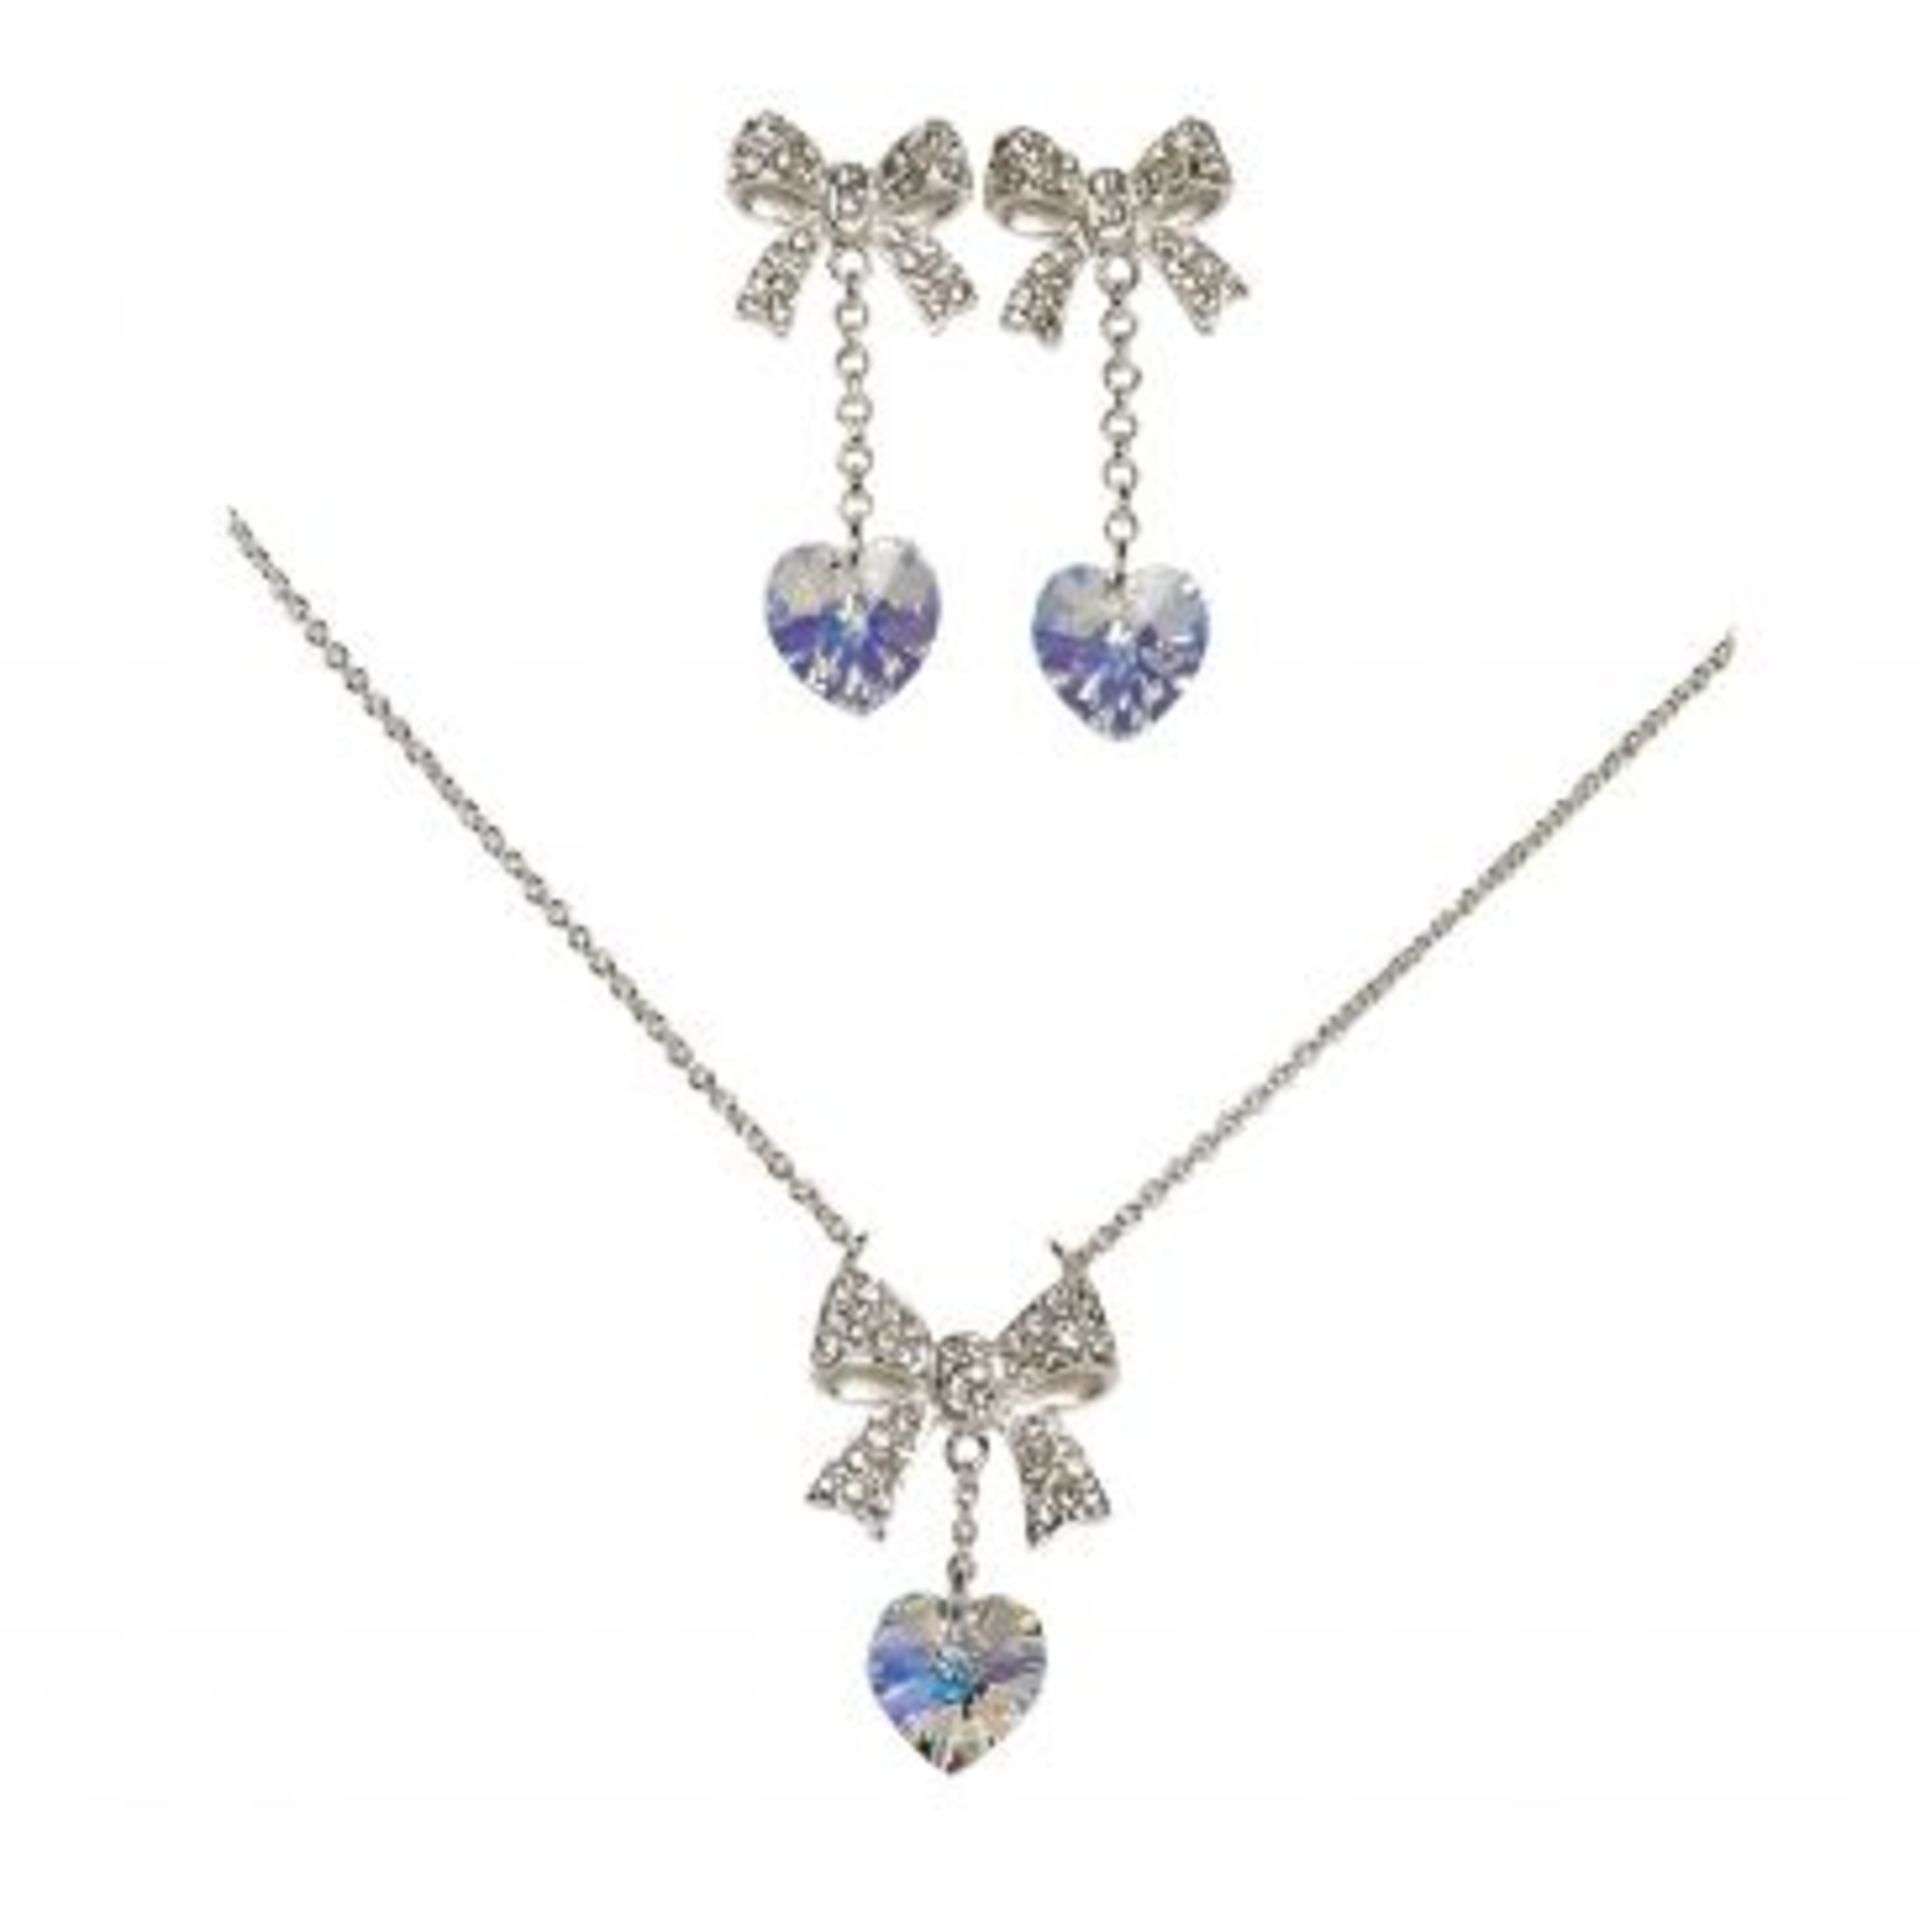 10 x HEART PENDANT AND EARRING SETS By ICE London - EGJ-9900 - Silver-tone Curb Chain Adorned With - Image 3 of 3